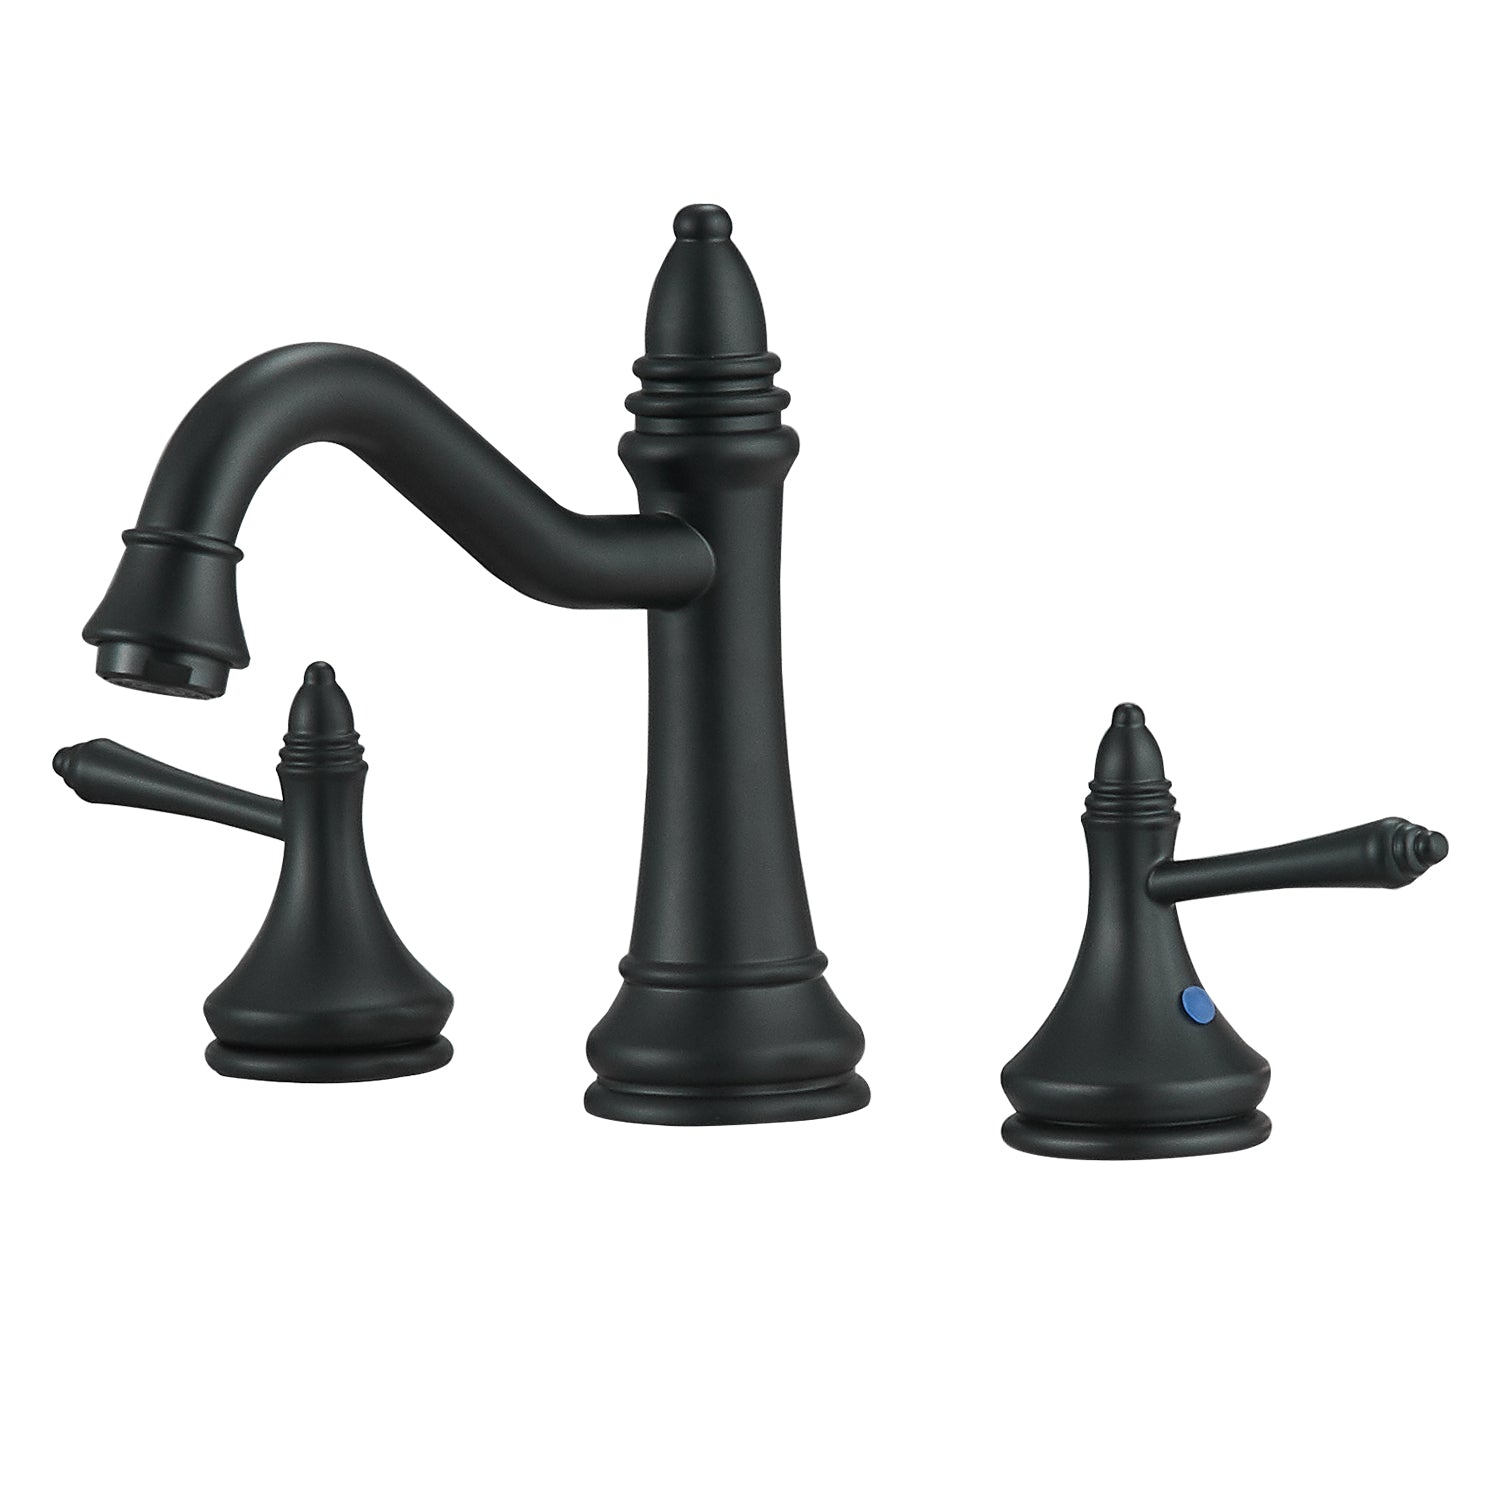 8 in. Widespread Double Handle Classical Spout Bathroom Faucet with Drain Kit Included in Matte Black